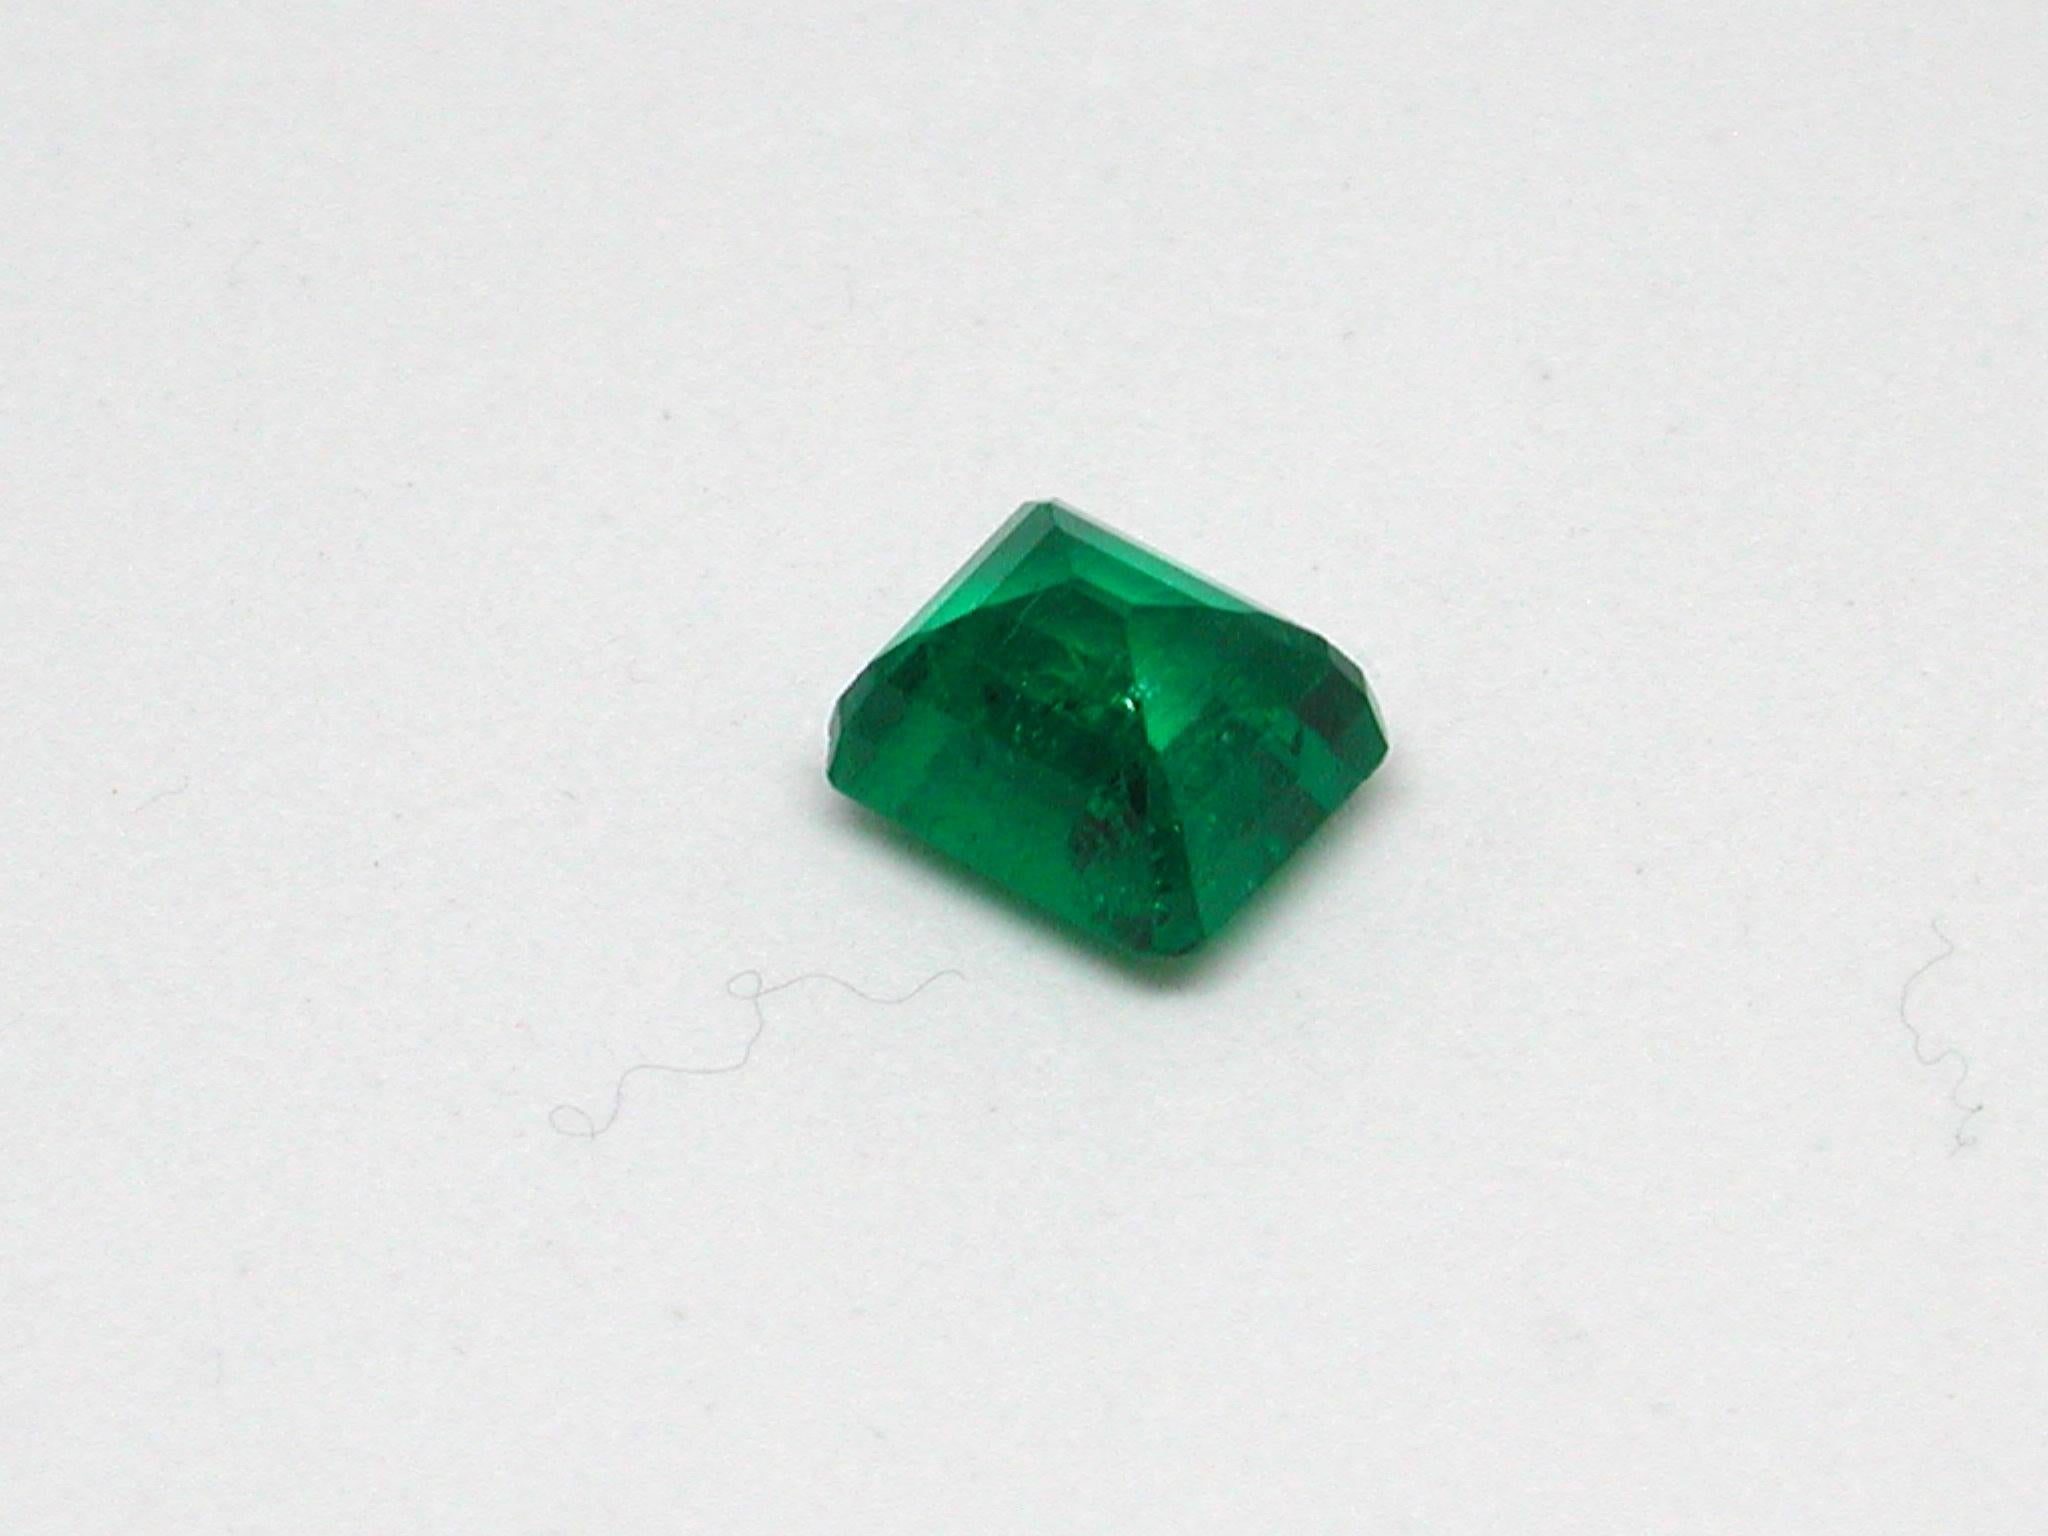 IGI Certificate Number: F5F48375
Weight: 10.42ct. 
Shape and Cut: Emerald
Color and Transparency: Green, Transparent
Fine Color Quality
Origin: Colombia
Enhancements of Emeralds are common practice
Please see certificate for more details
Shipping: